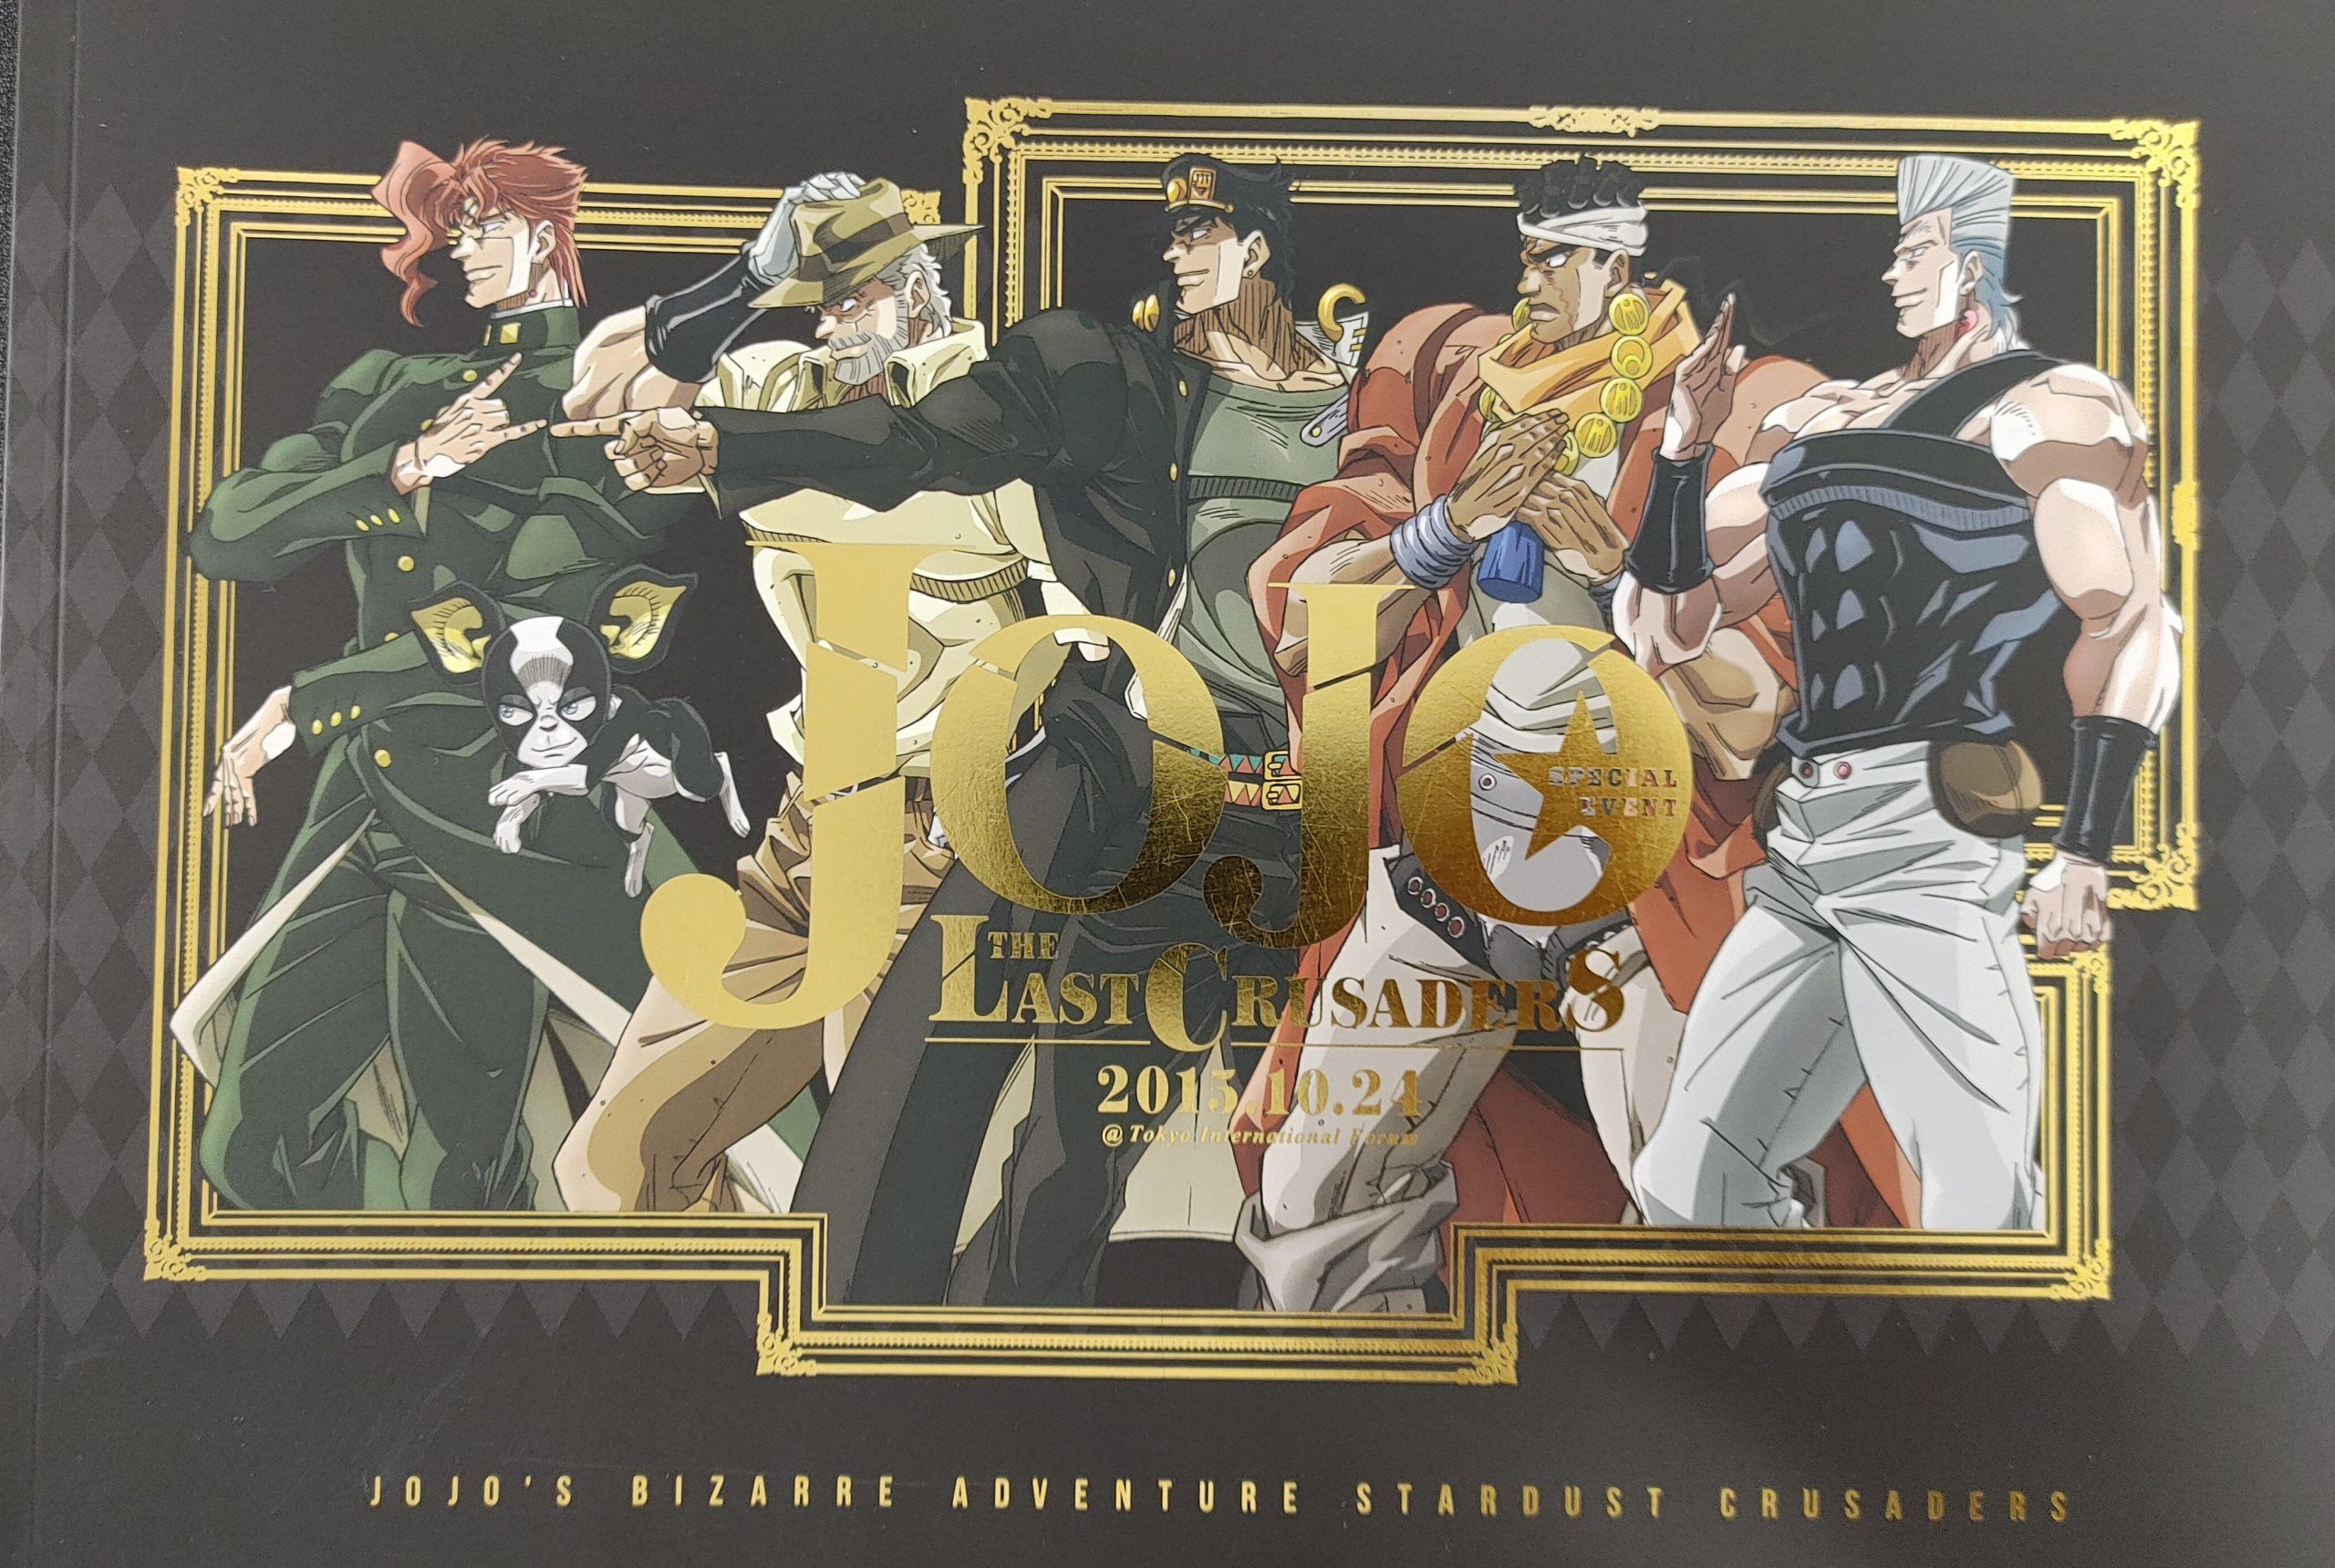 (BOOK) JOJO’S BIZARRE ADVENTURE THE LAST CRUSADERS SPECIAL EVENT PAMPHLET